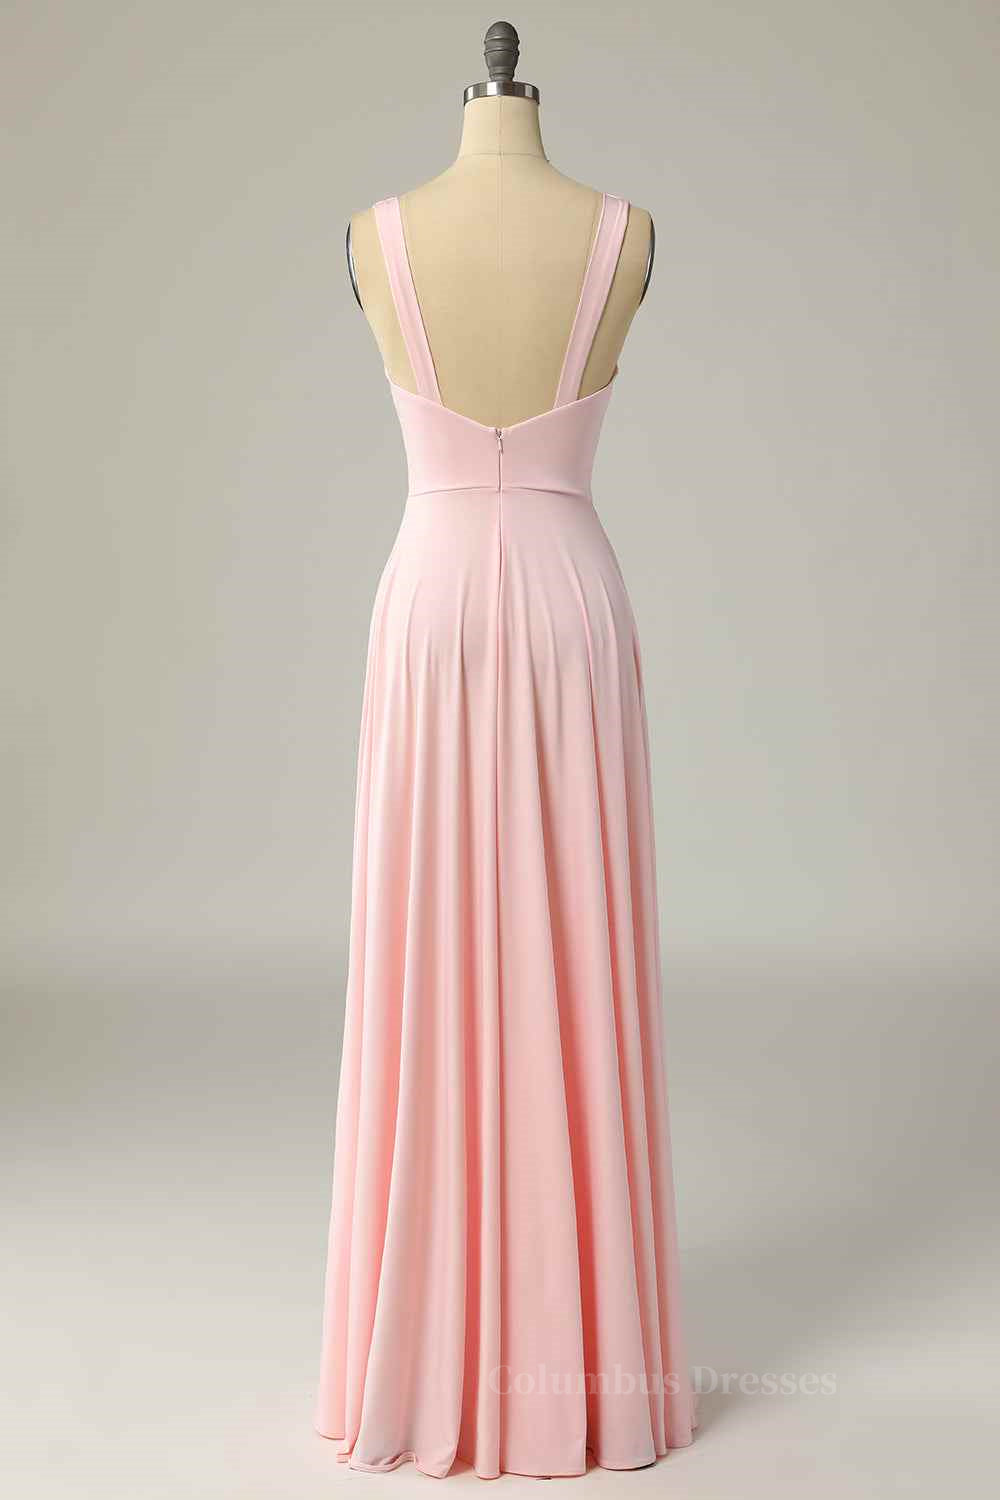 Bridesmaid Dresses Idea, Candy Pink A-line Illusion Lace Cap Sleeves Chiffon Long Prom Dress